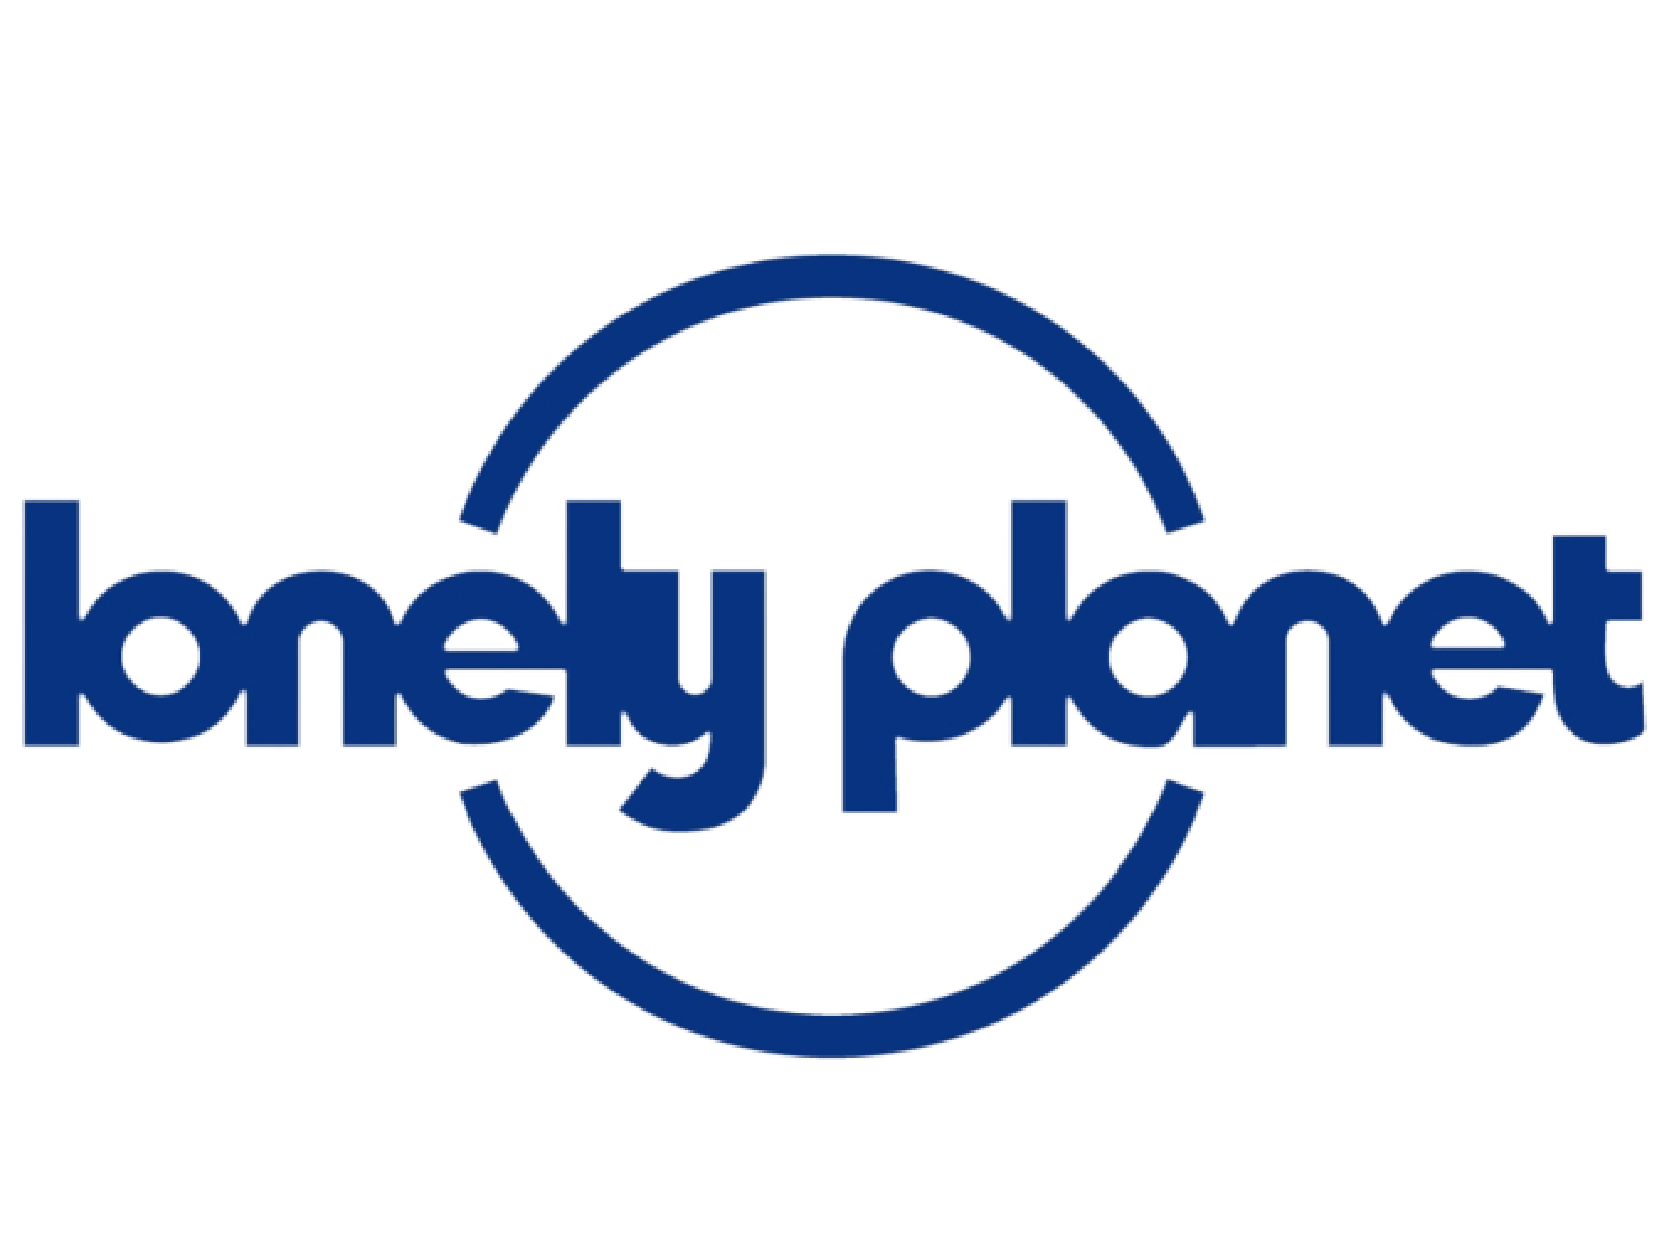 Lonely Planet 